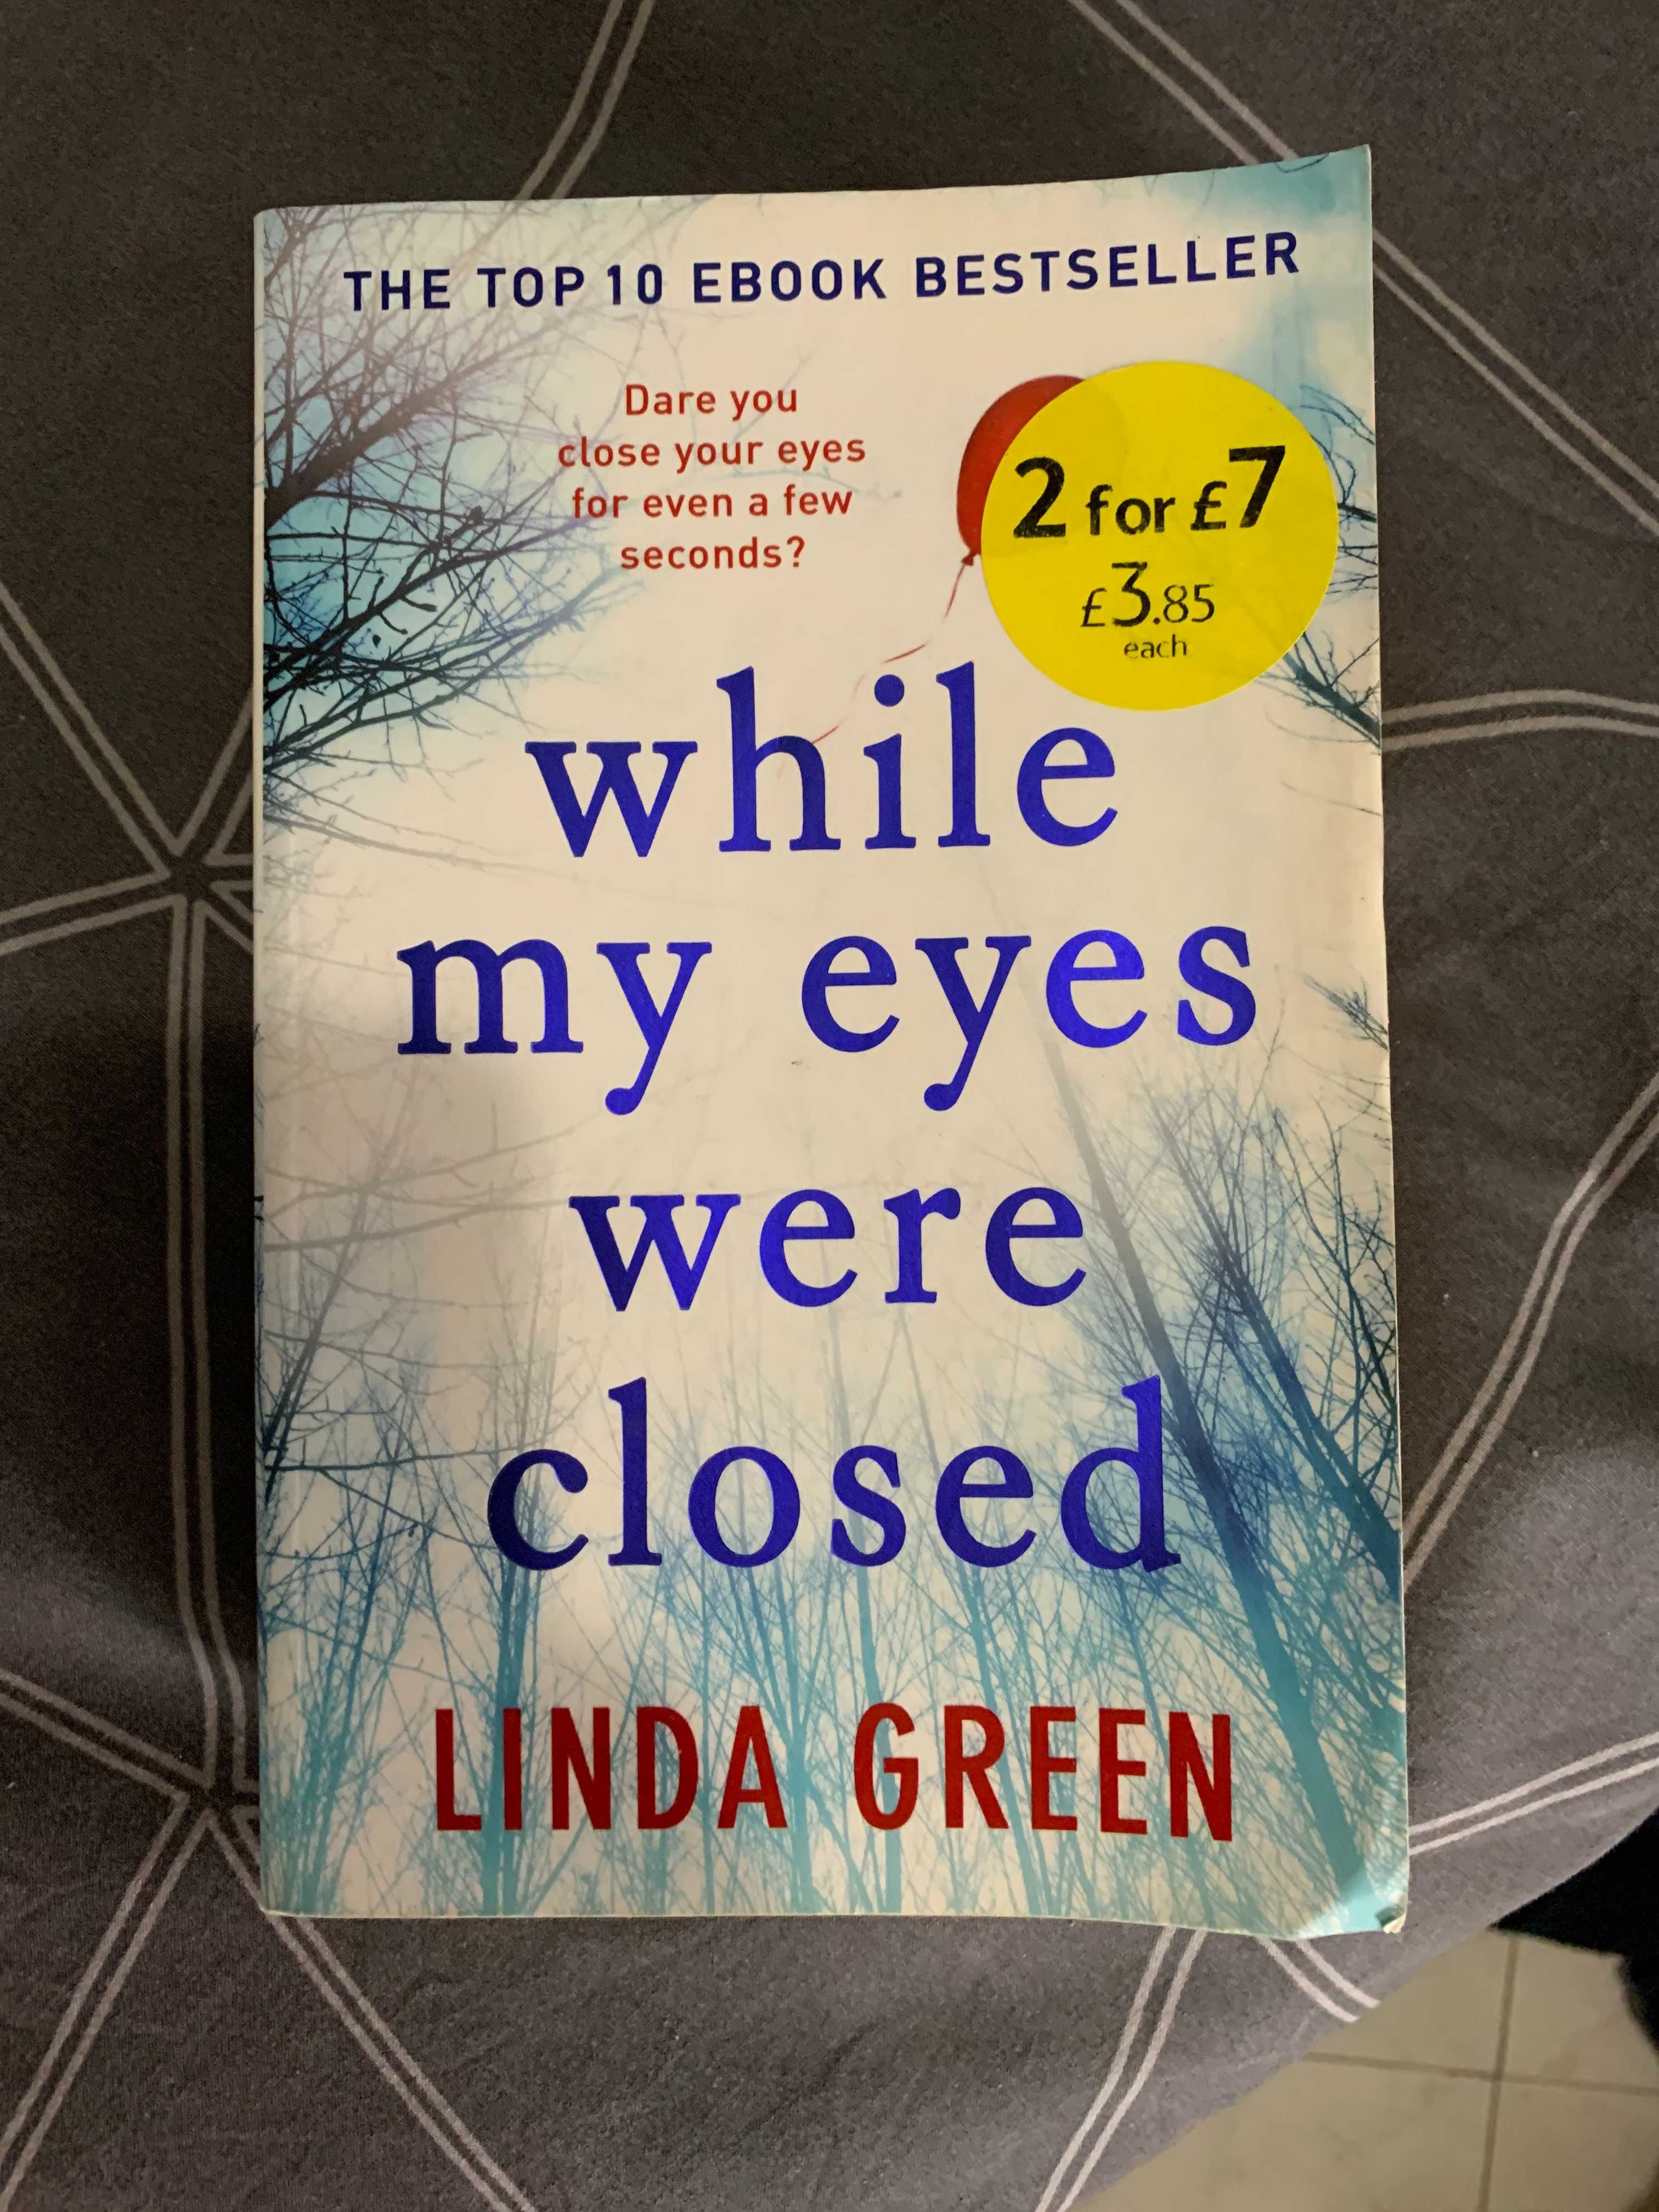 Linda Green - While my eyes were closed